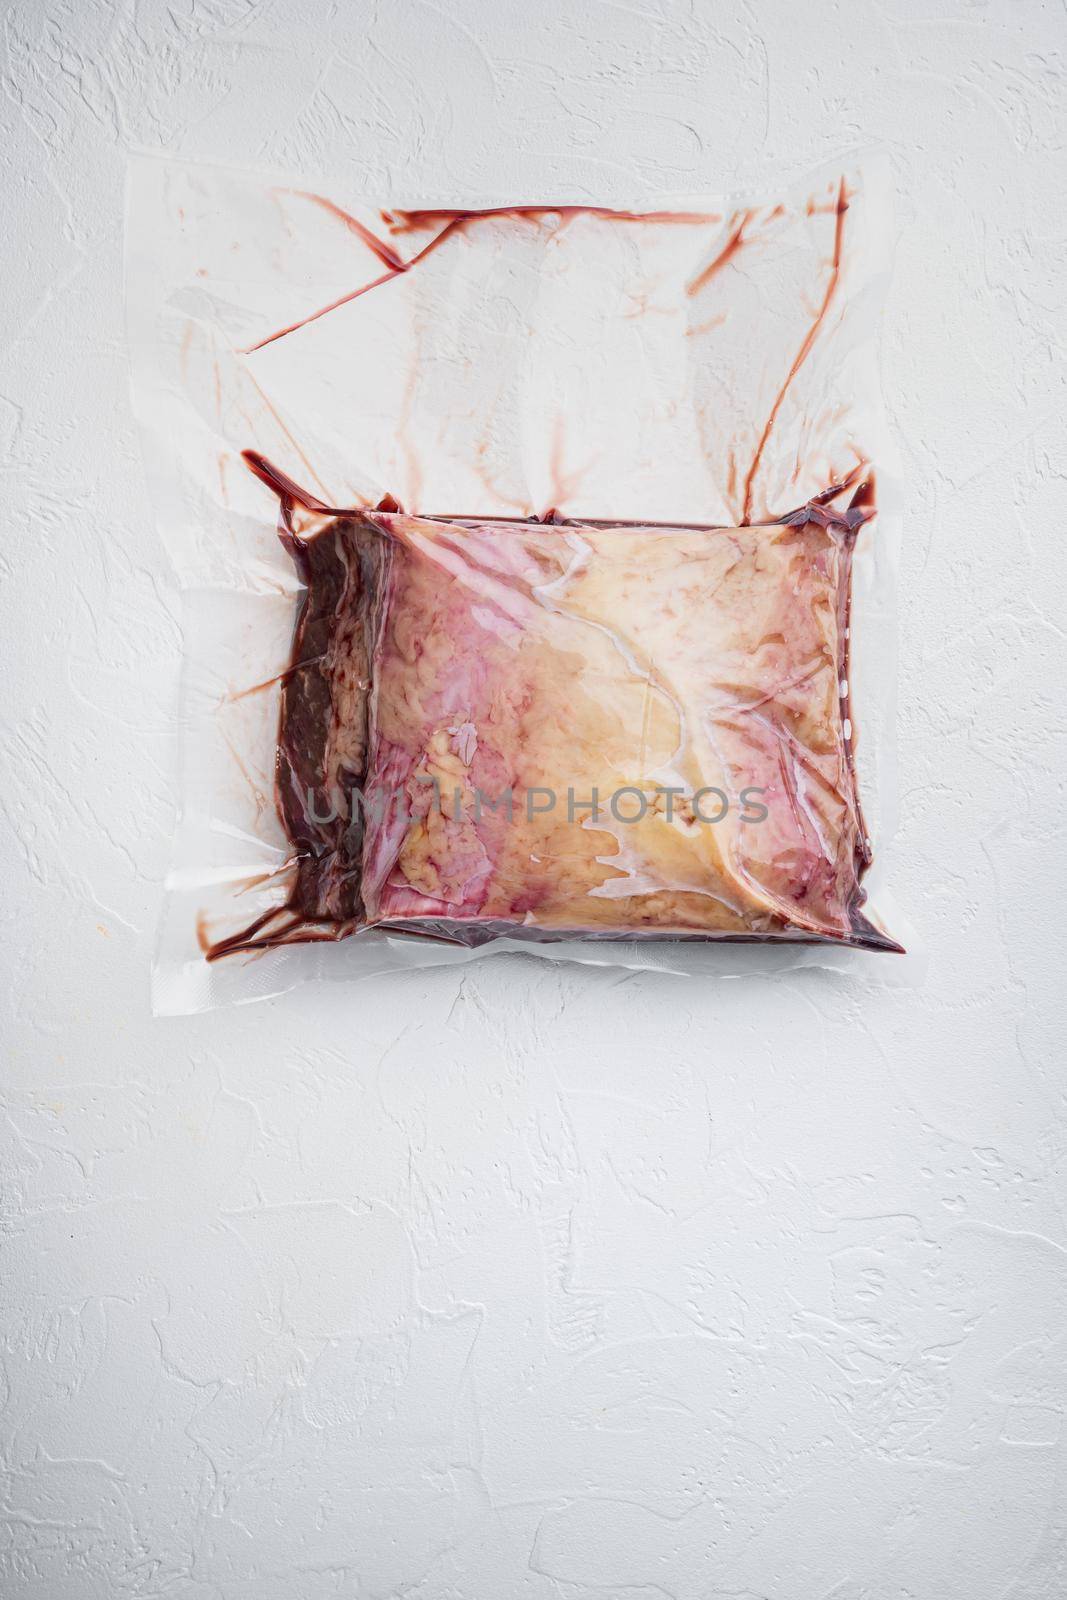 Top sirloin beef big cut in plastic pack, on white background, top view, with copy space for text